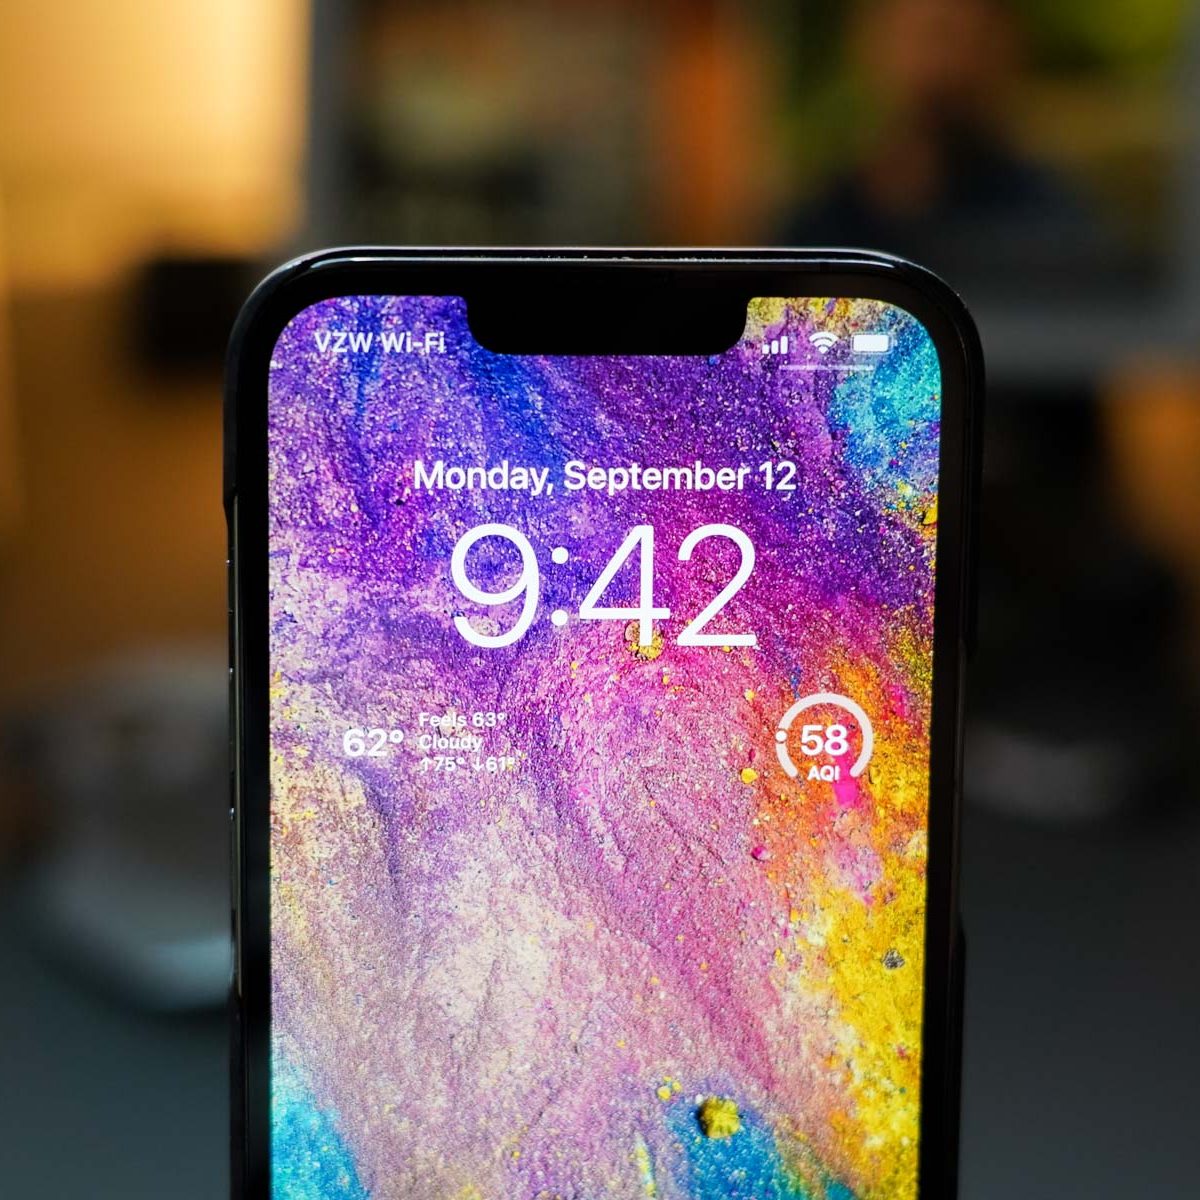 Google offers a suite of widgets for the iPhone’s lock screen with iOS 16